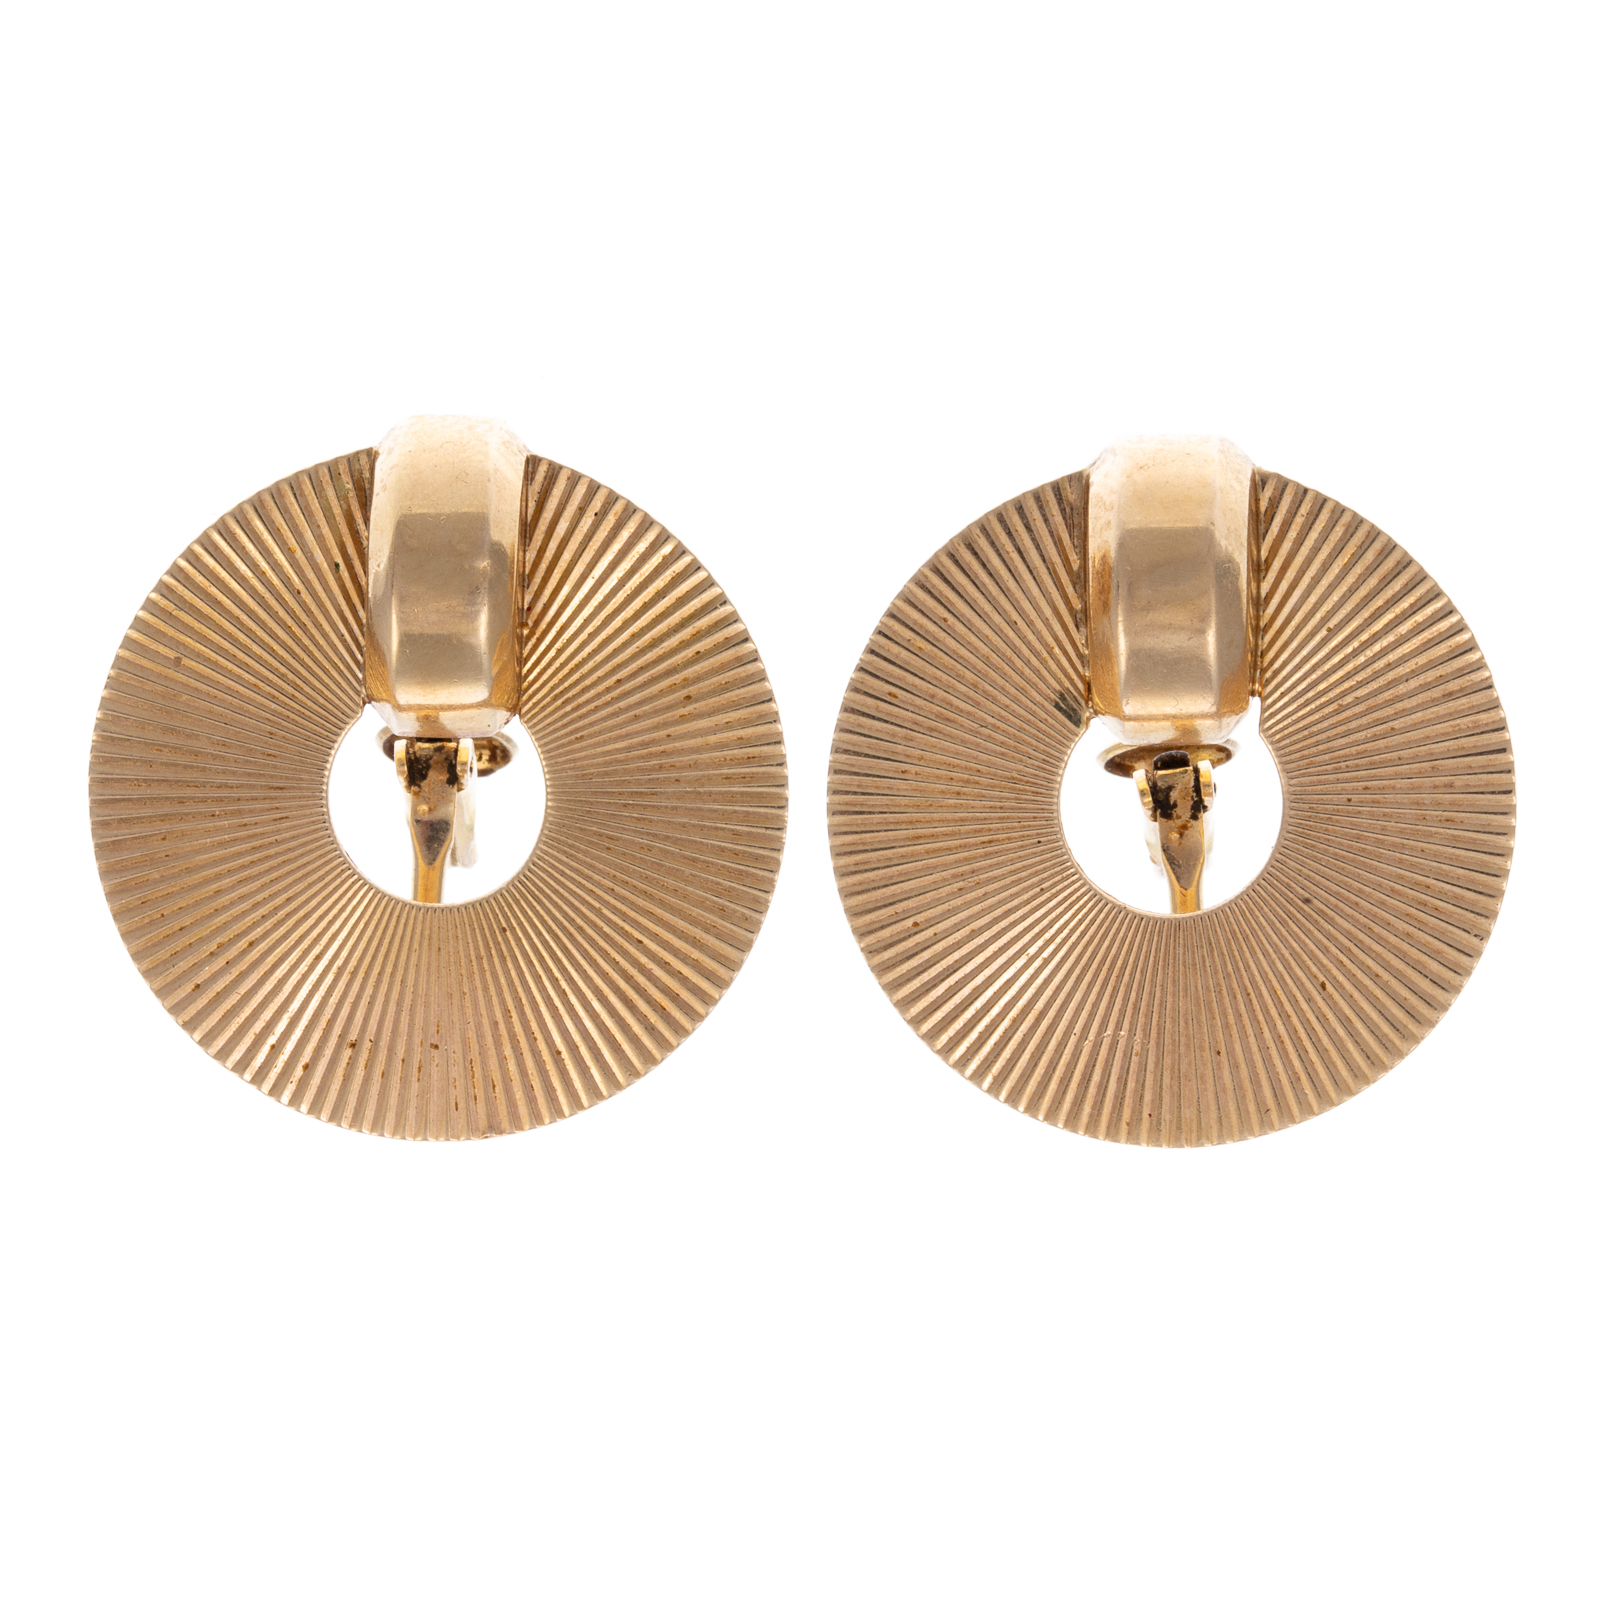 A PAIR OF ROUND RETRO EARRINGS 33858d